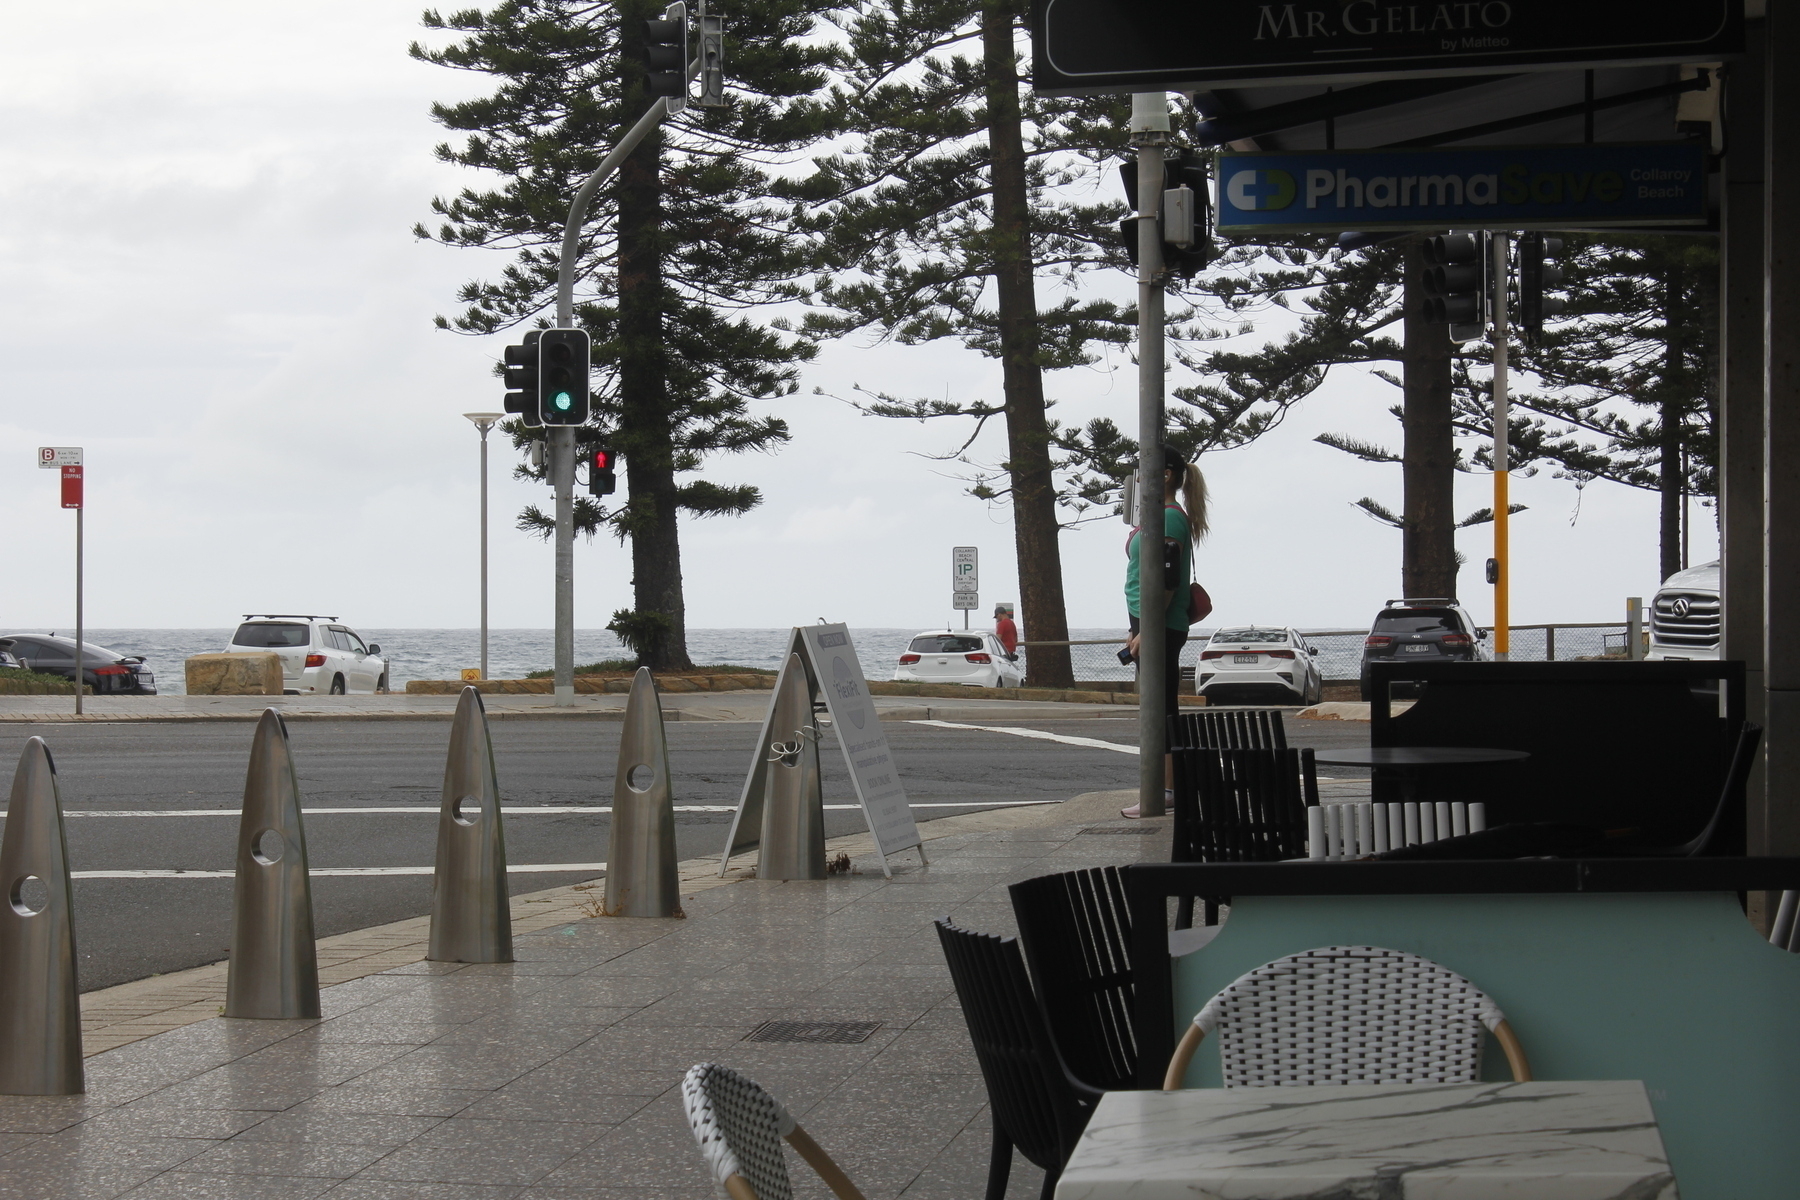 A street corner with bicycle stands and cafe chairs and tables in the foreground, palm trees across the road and the ocean beyond. The sky is a mass of pale grey cloud and the sea is dark grey and choppy. In the middle ground, on this side of the road, a woman stands facing left behind a pole, waiting to cross the side street; her ponytail spikes out behind the pole and her nose pokes out in front of it. The front and back of her body are on either side of the pole. In the distance, across the road, the timber top of a fence runs along the horizon from the right and dips below it in the middle of the image.